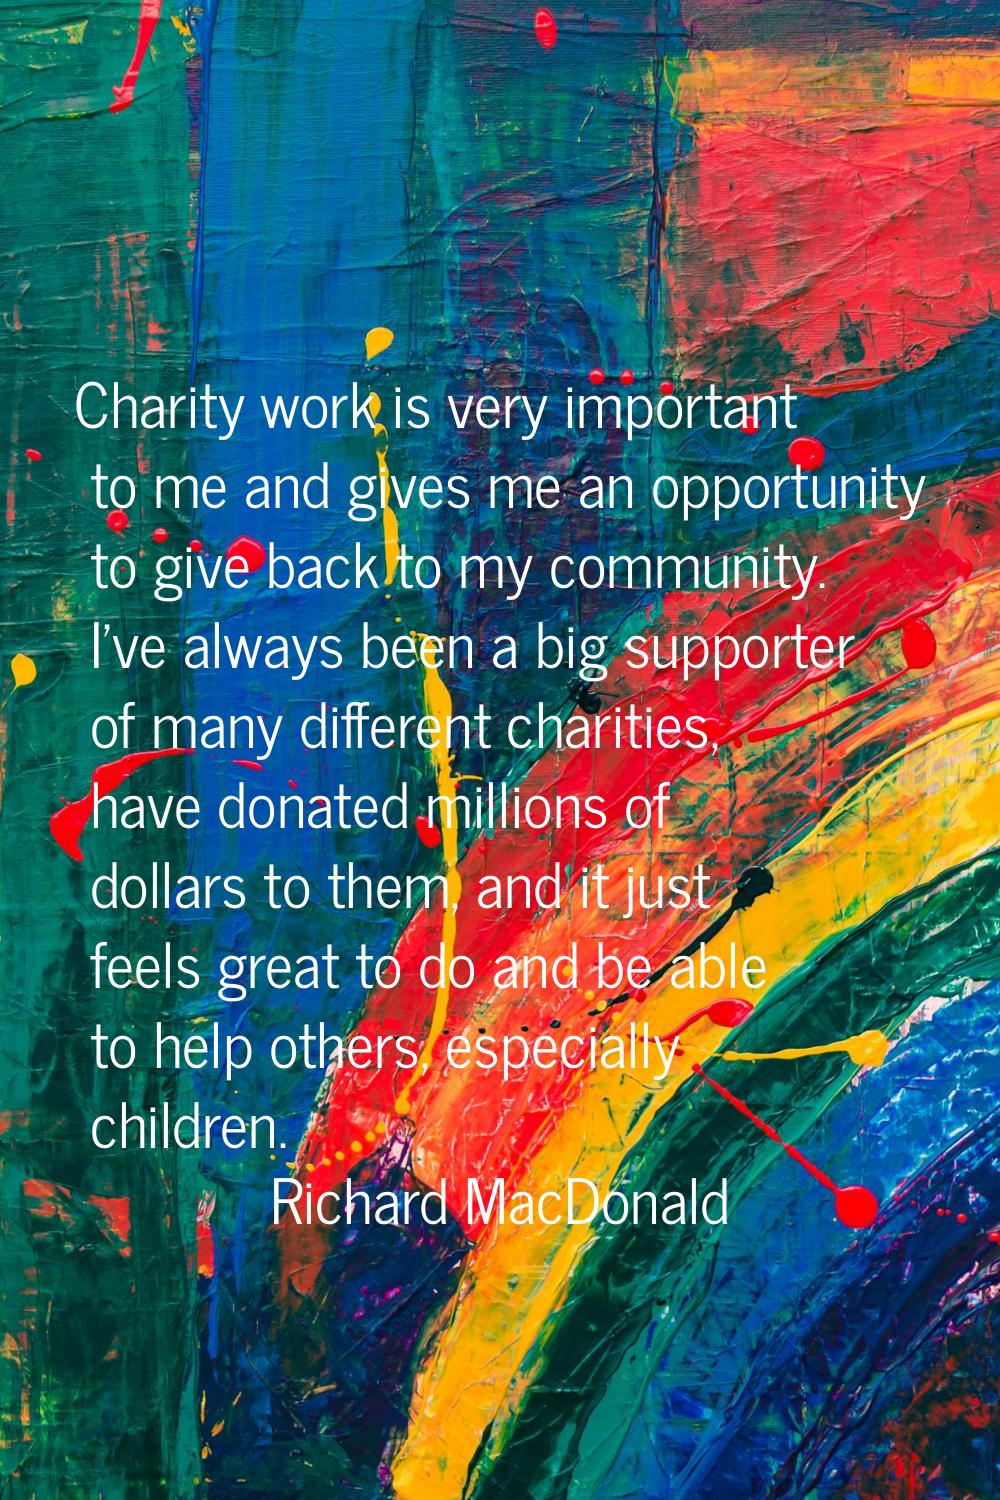 Charity work is very important to me and gives me an opportunity to give back to my community. I've